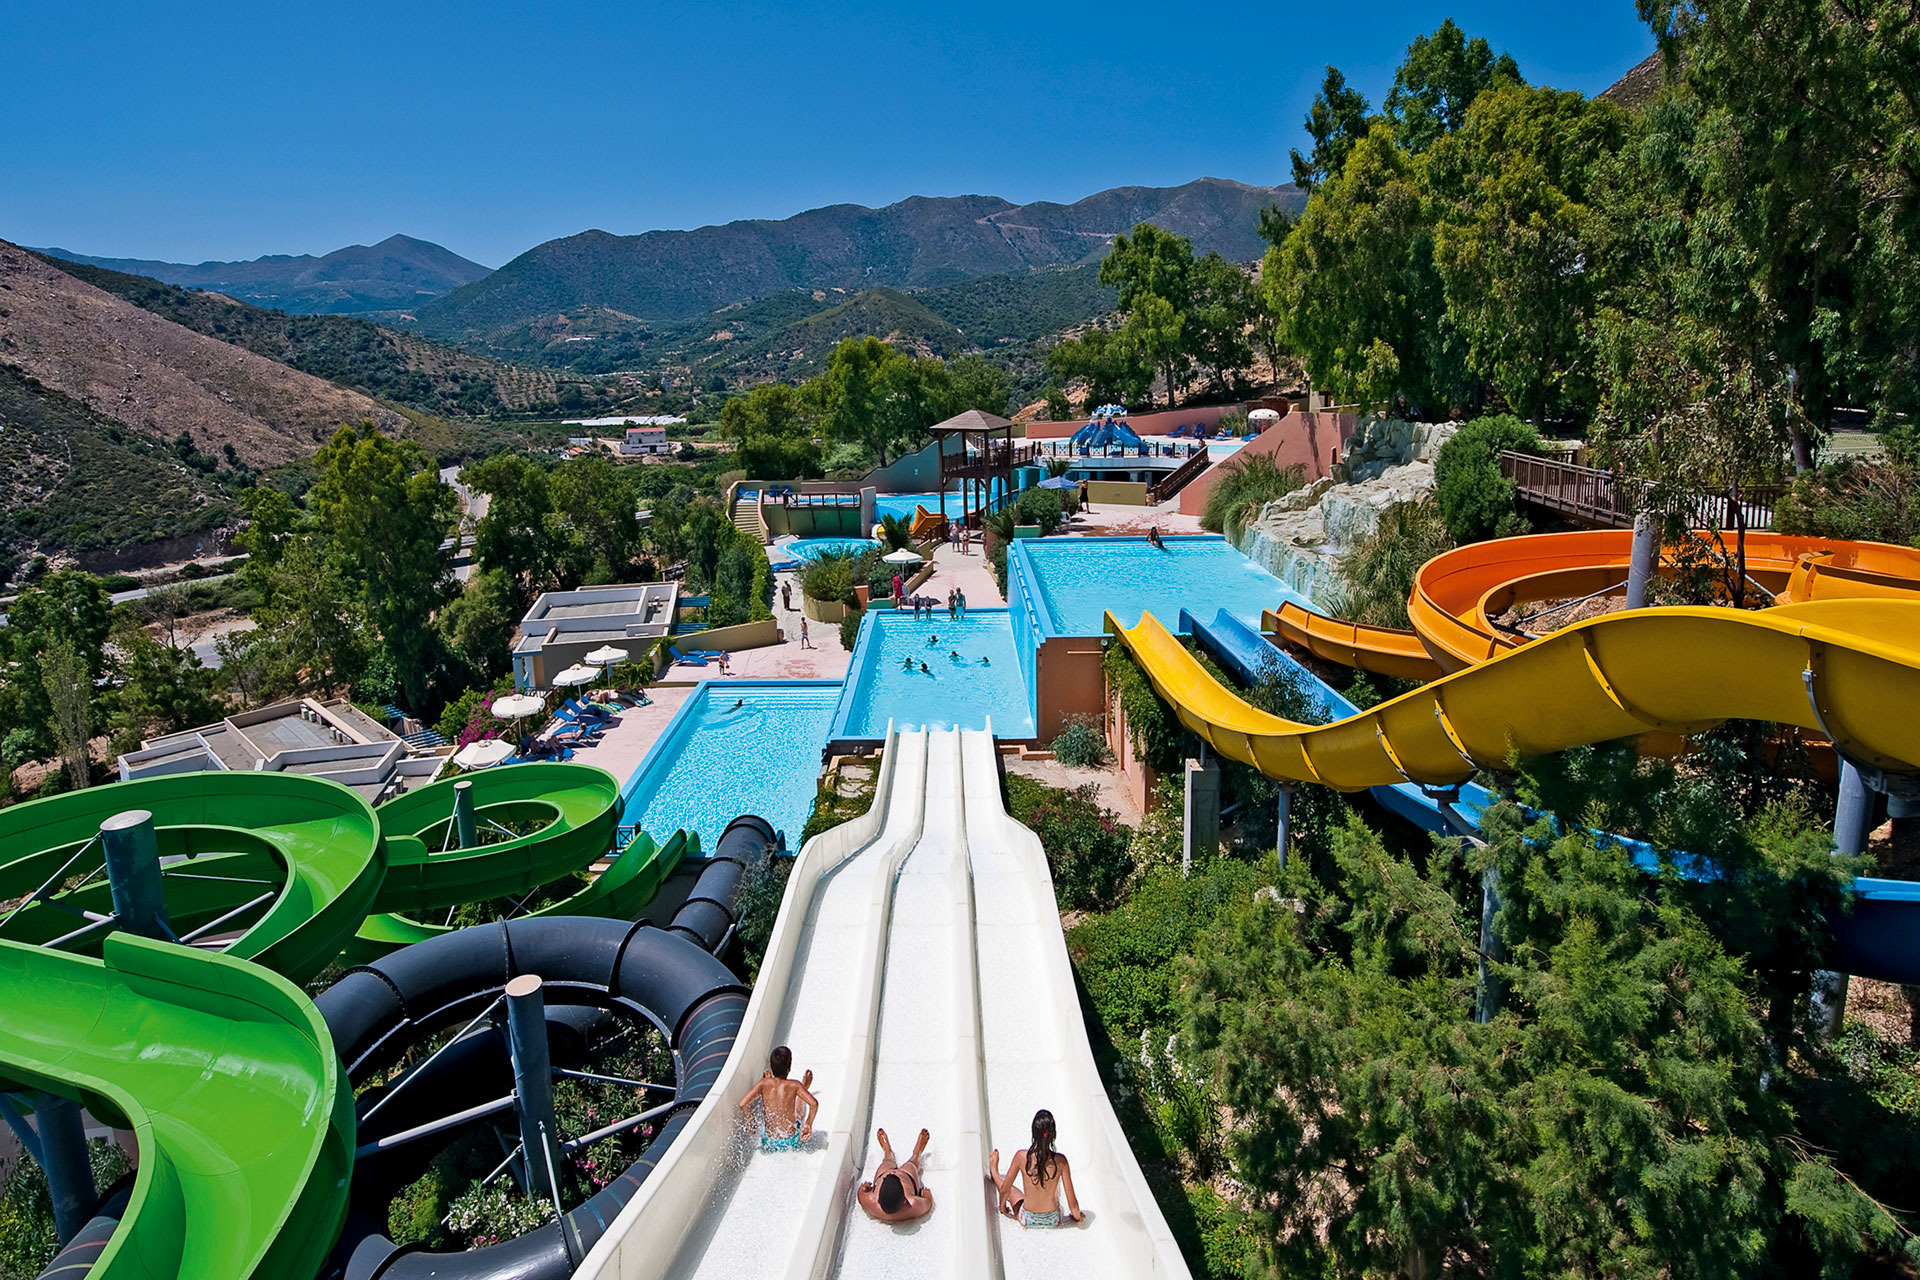 Waterpark in Crete, surrounded by forests and mountains